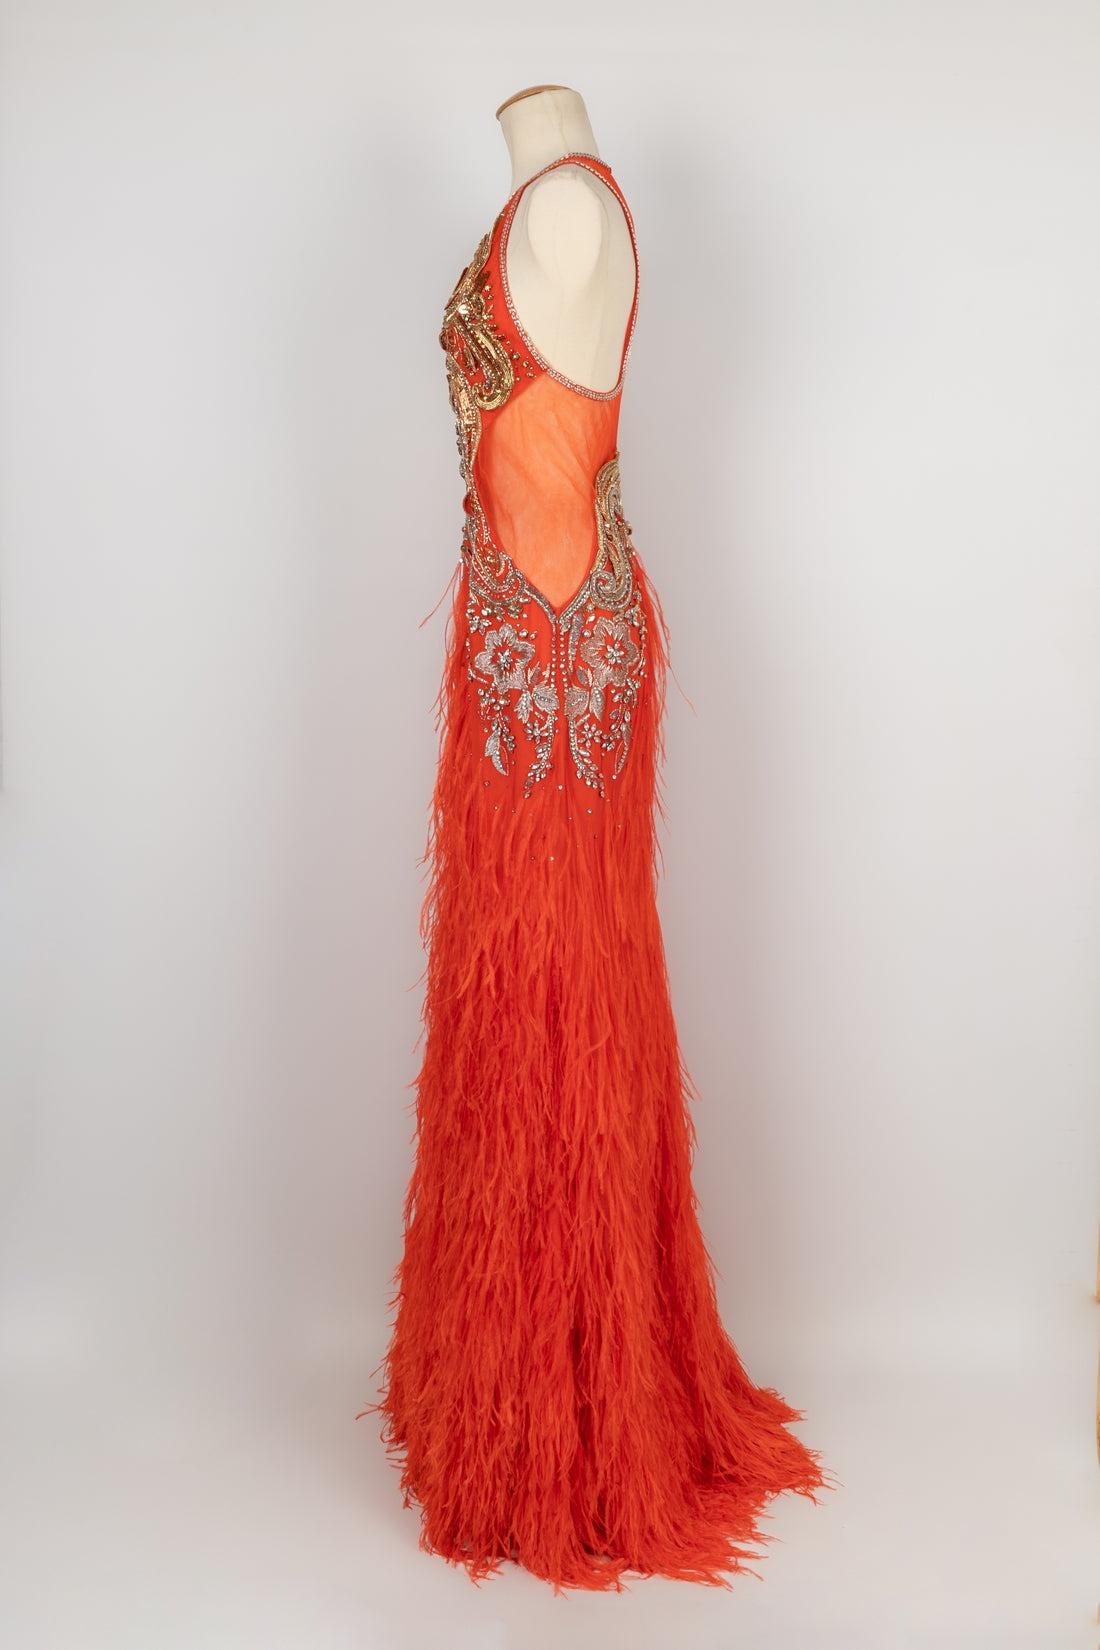 Cavalli - Long orange tulle dress embroidered with pearls, sequins, and golden threads. It is also sewn with feathers. No size nor composition label, it fits a 36FR.

Additional information:
Condition: Very good condition
Dimensions: Chest: 40 cm -